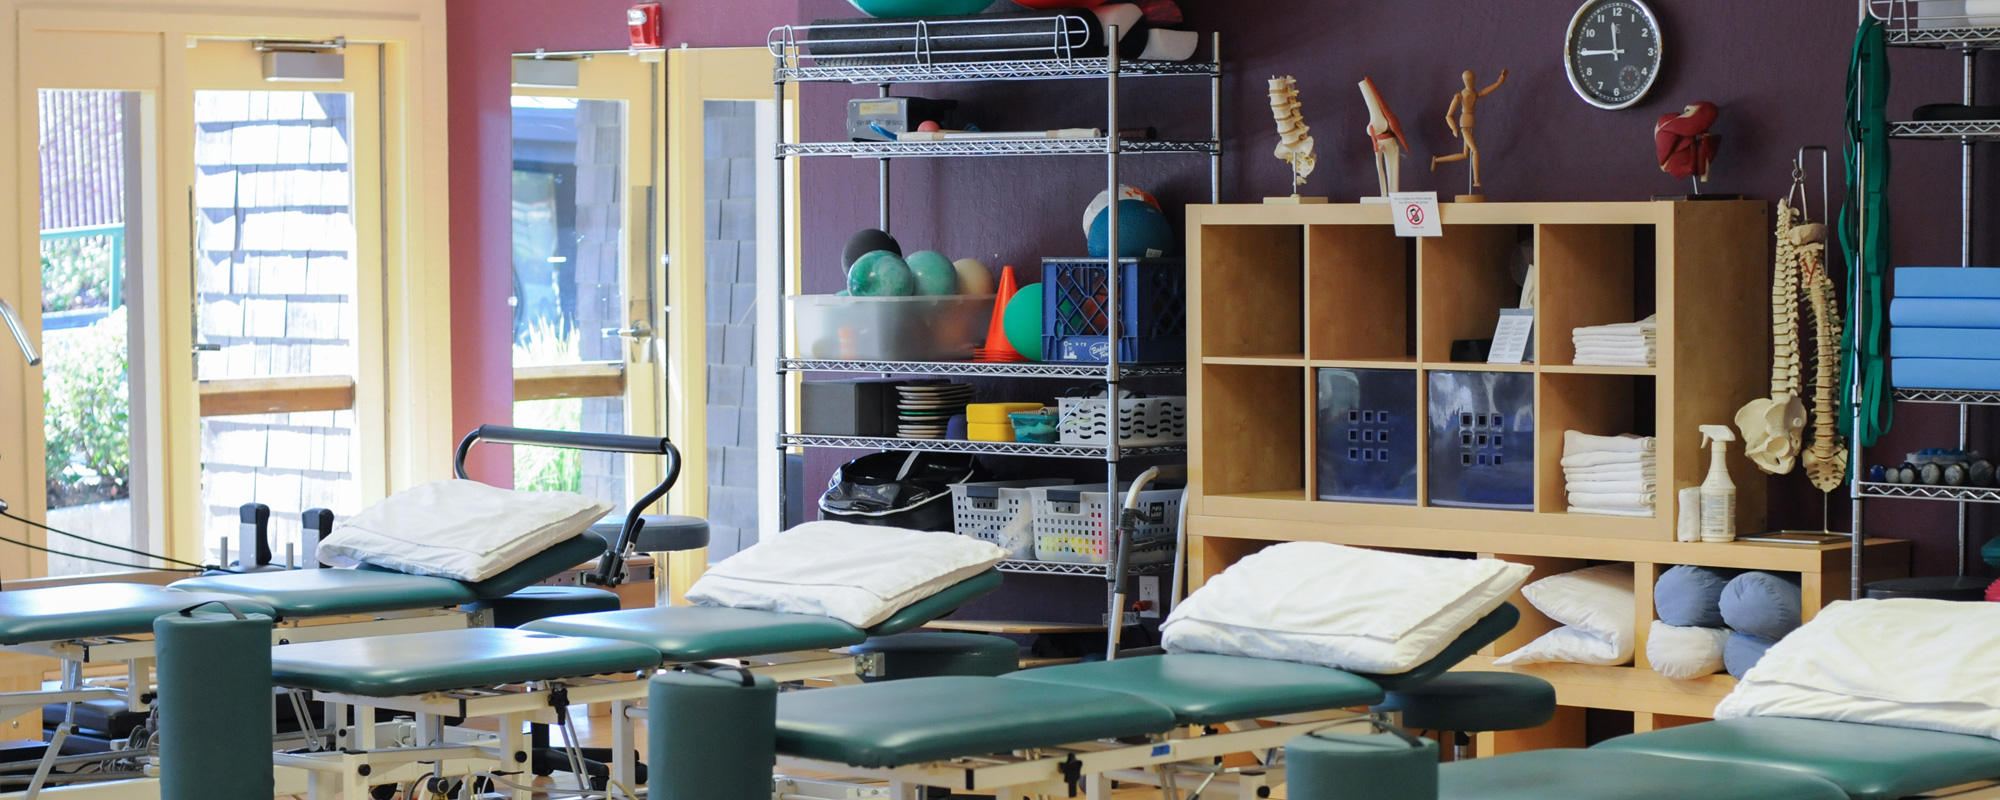 Lafayette Physical Therapy Interior